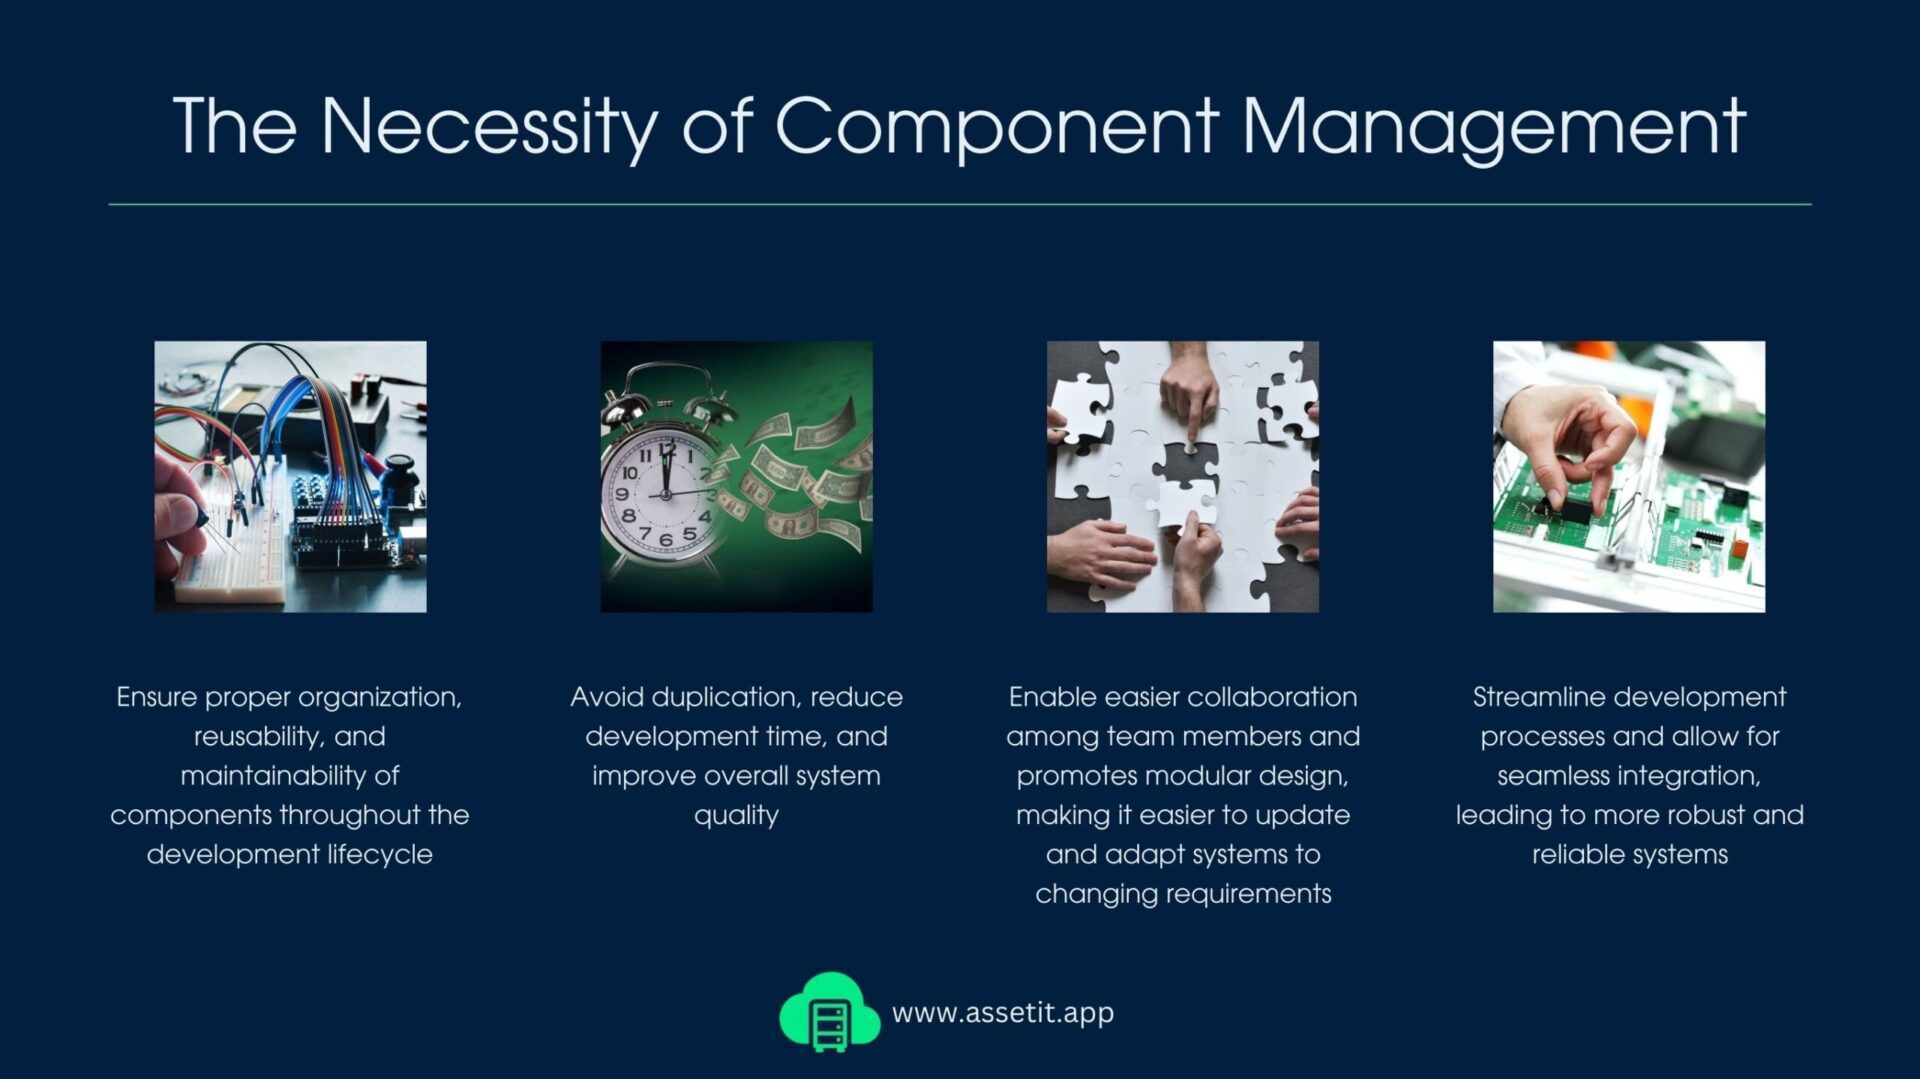 The Necessity of Components Management - manage components